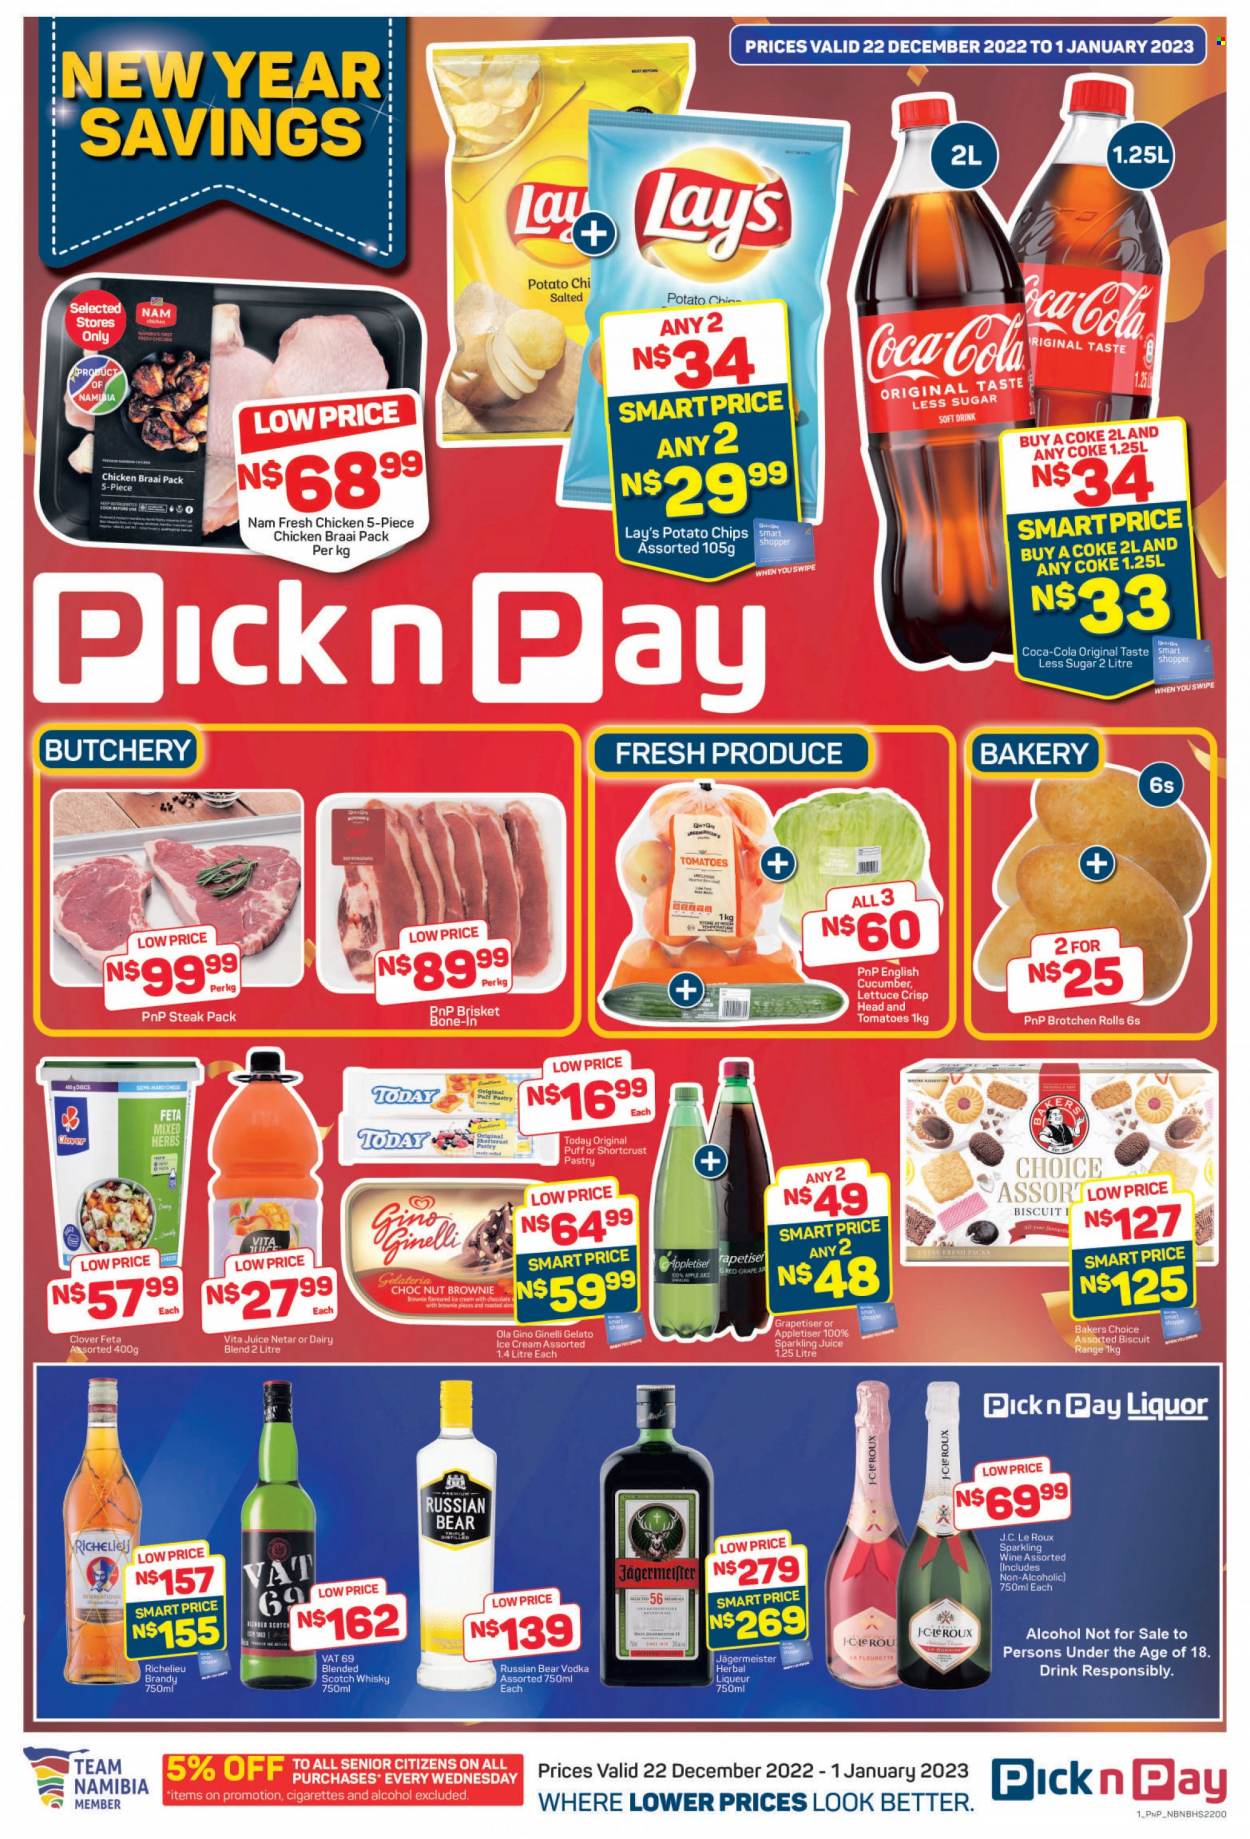 thumbnail - Pick n Pay catalogue  - 22/12/2022 - 01/01/2023 - Sales products - shortcrust pastry, brownies, lettuce, feta, Clover, dairy blend, puff pastry, ice cream, Gino Ginelli, Ola, gelato, biscuit, potato chips, chips, Lay’s, apple juice, Coca-Cola, juice, soft drink, sparkling juice, Bai, sparkling wine, wine, alcohol, brandy, liqueur, vodka, liquor, herbal liqueur, Richelieu, Jägermeister, Russian Bear, Vat 69, scotch whisky, whisky, steak, Bakers. Page 1.